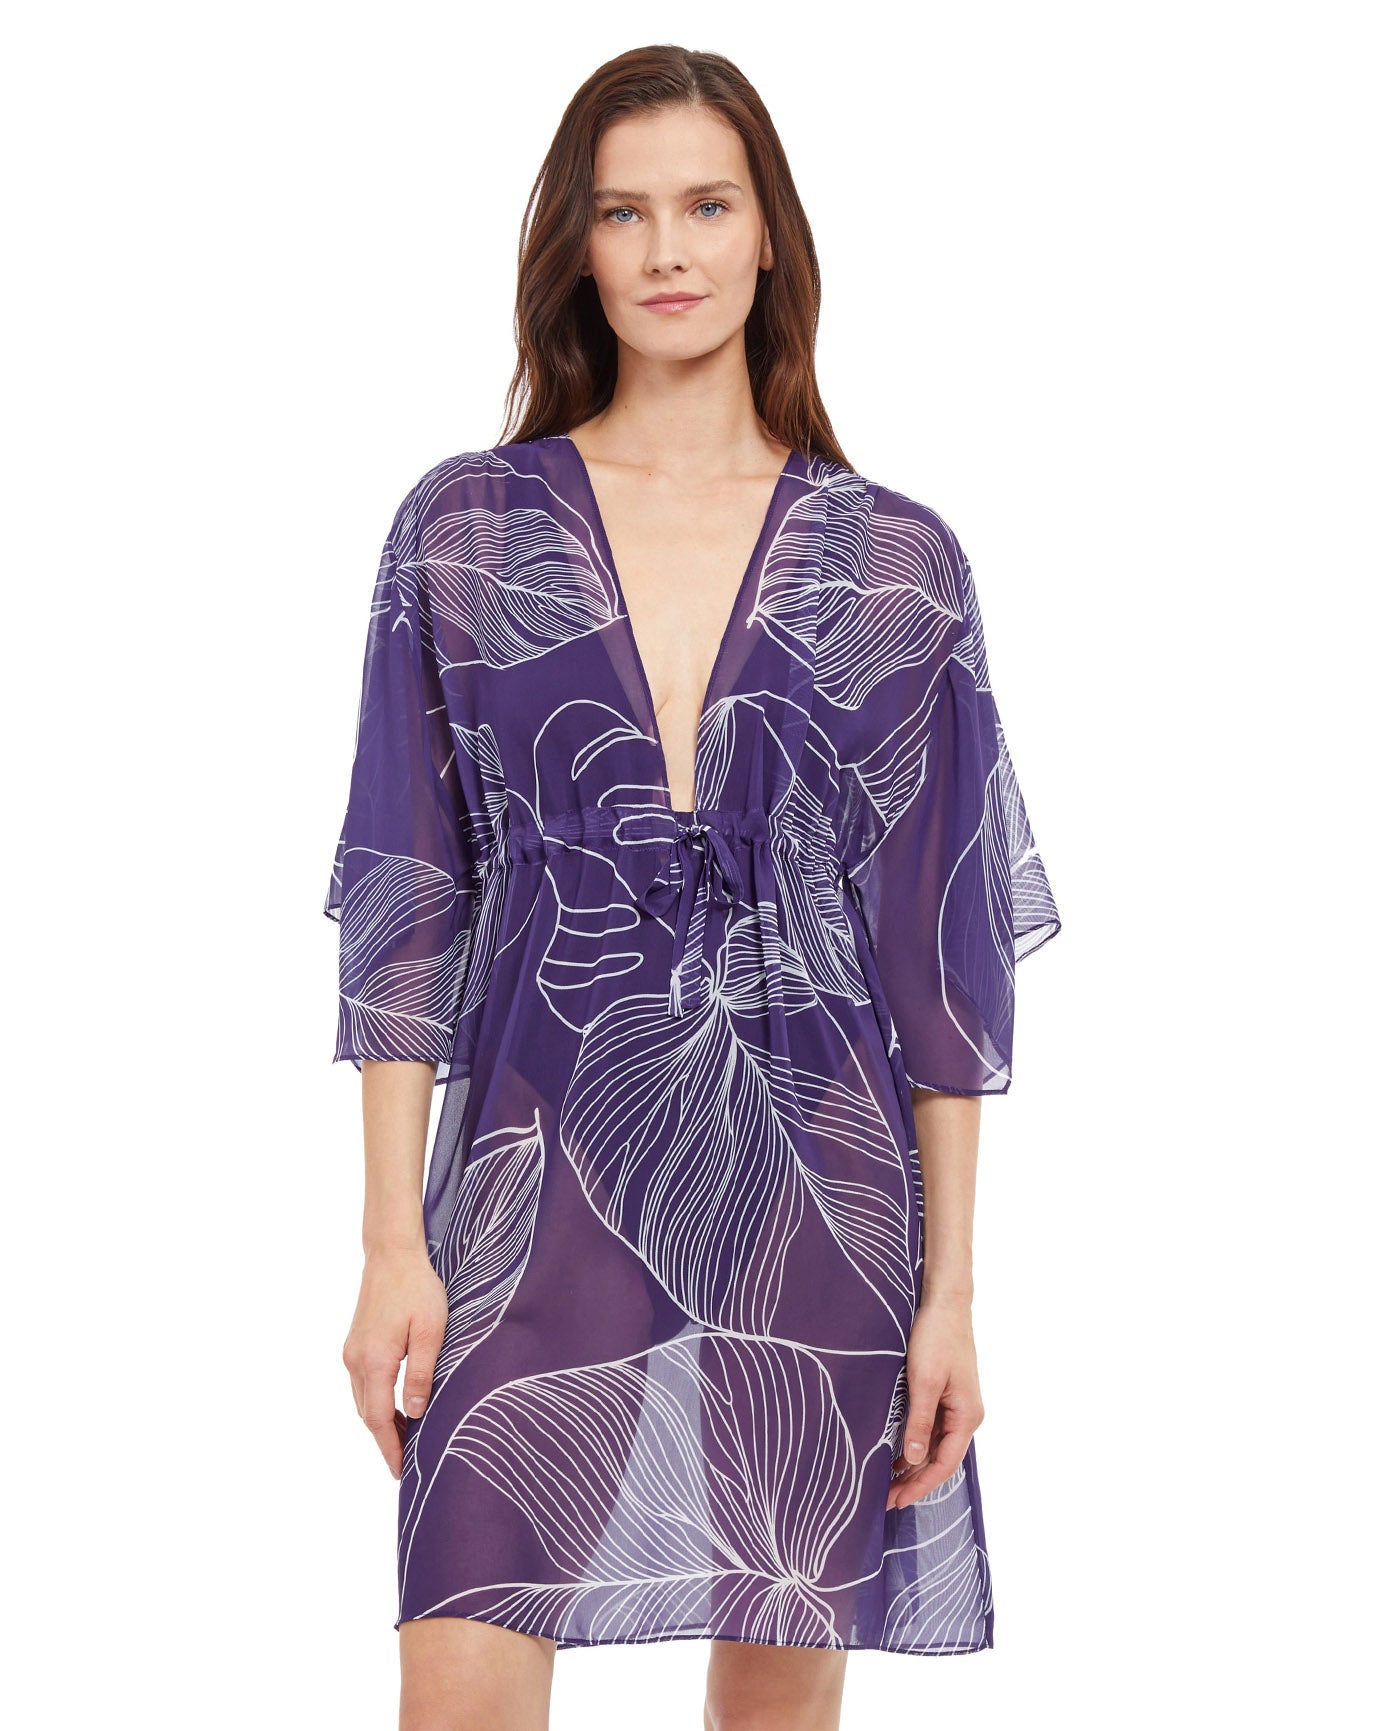 Front View Of Gottex Natural Essence Deep V-Neck Cover Up Dress | Gottex Natural Essence Ink And White